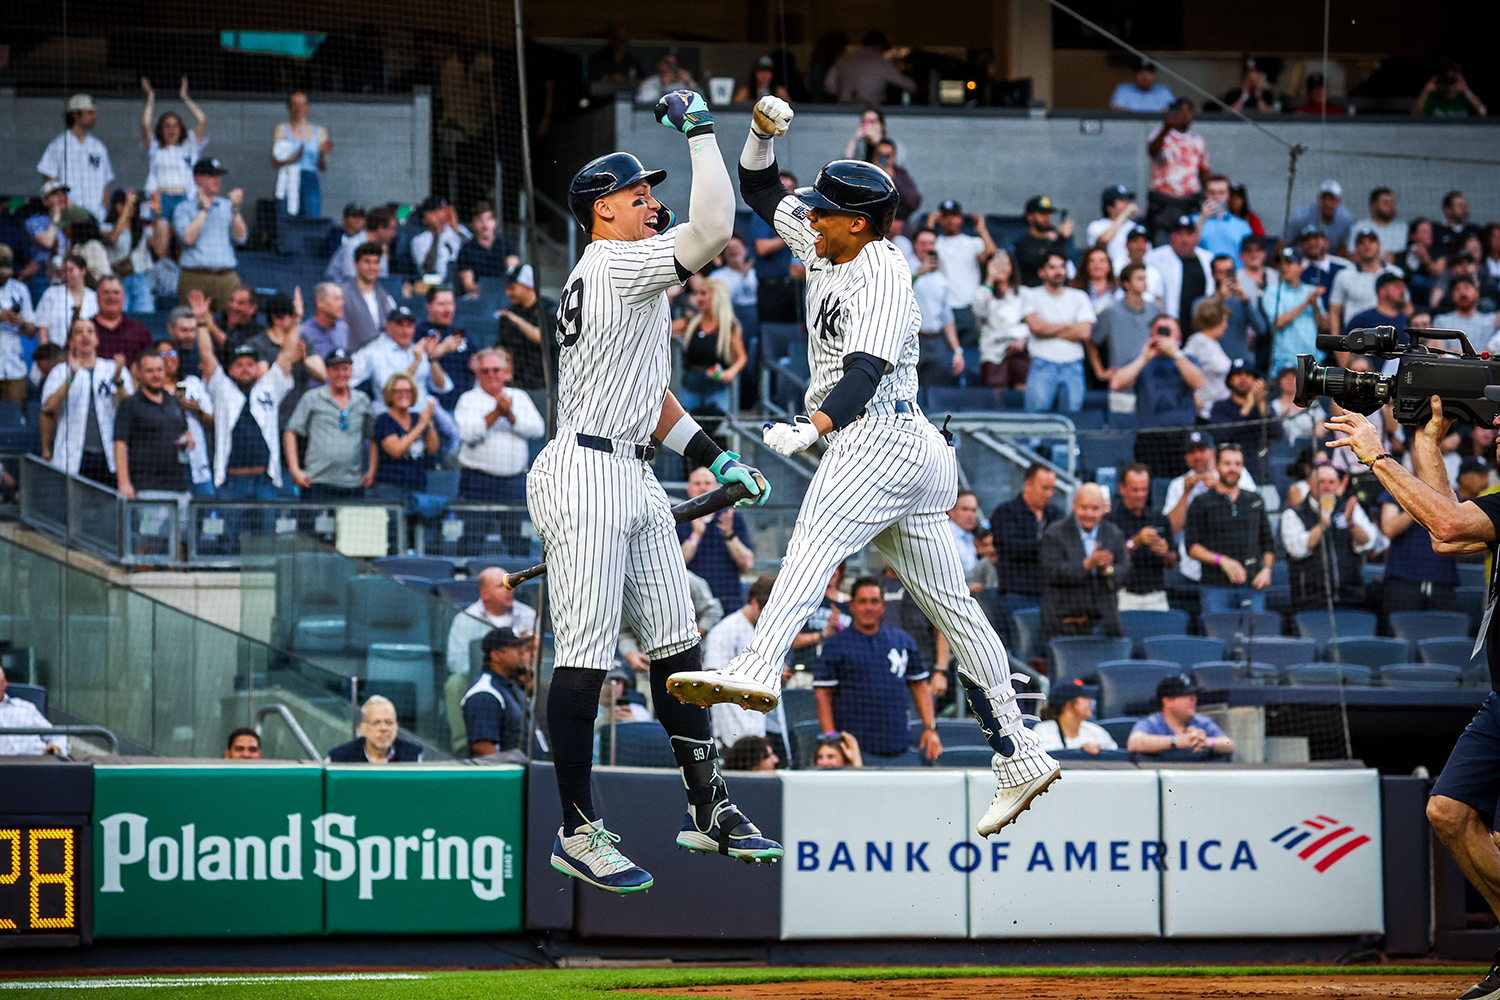 Yankees Extend Win Streak to Five With Convincing Victory Over Astros